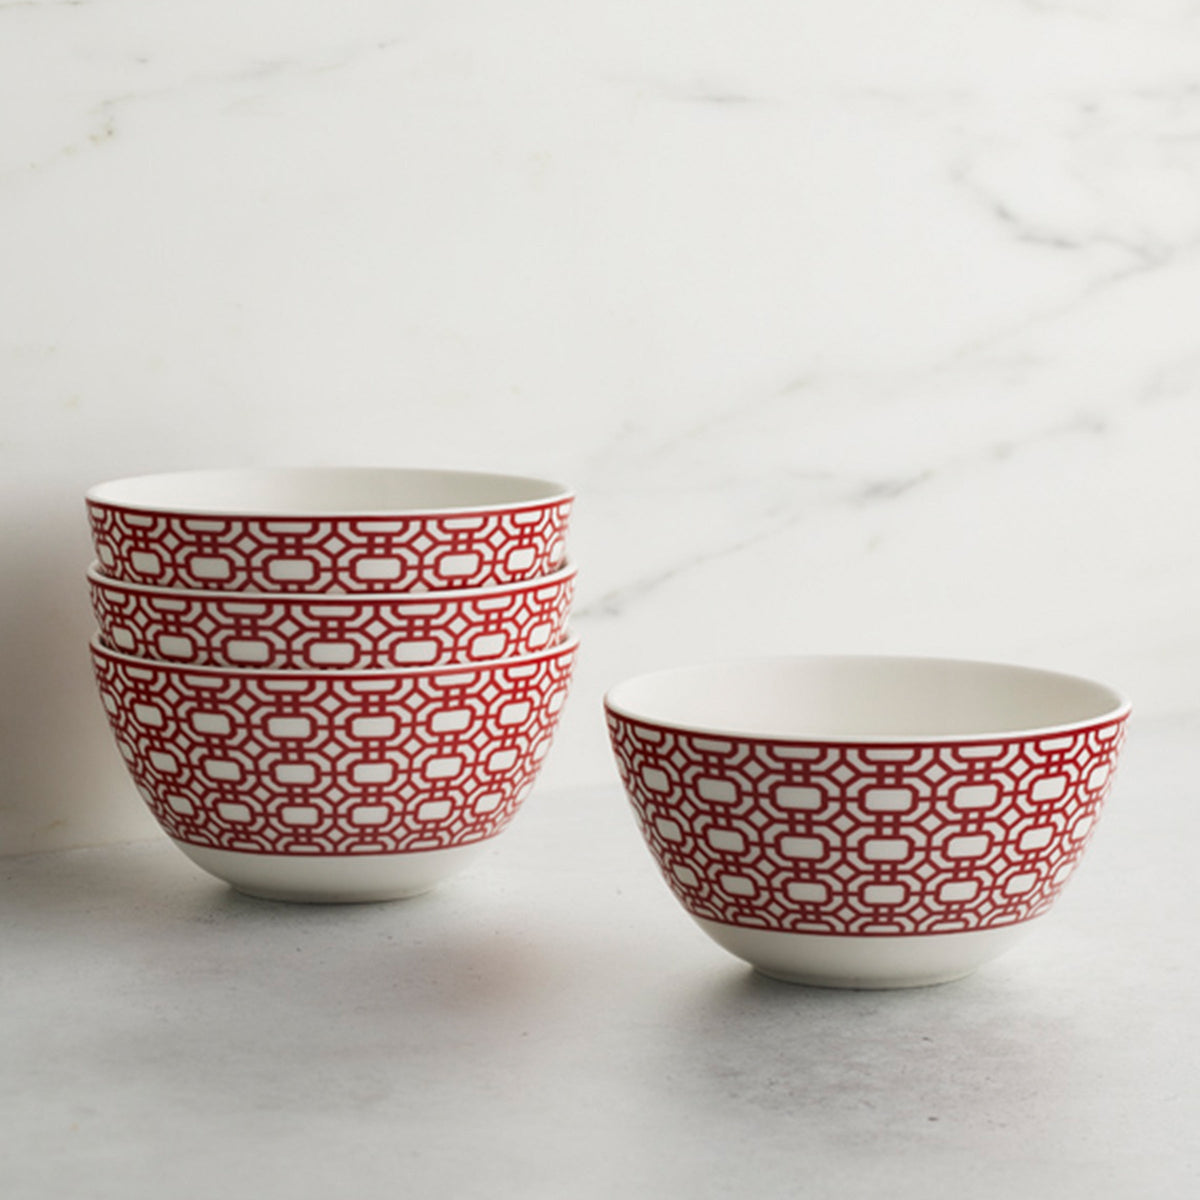 Four white porcelain bowls with a red geometric pattern, three stacked and one placed beside the stack, on a gray surface with a marbled white background. Perfect for your morning cereal, these Newport Crimson Cereal Bowls by Caskata add a touch of elegance to any kitchen setting.